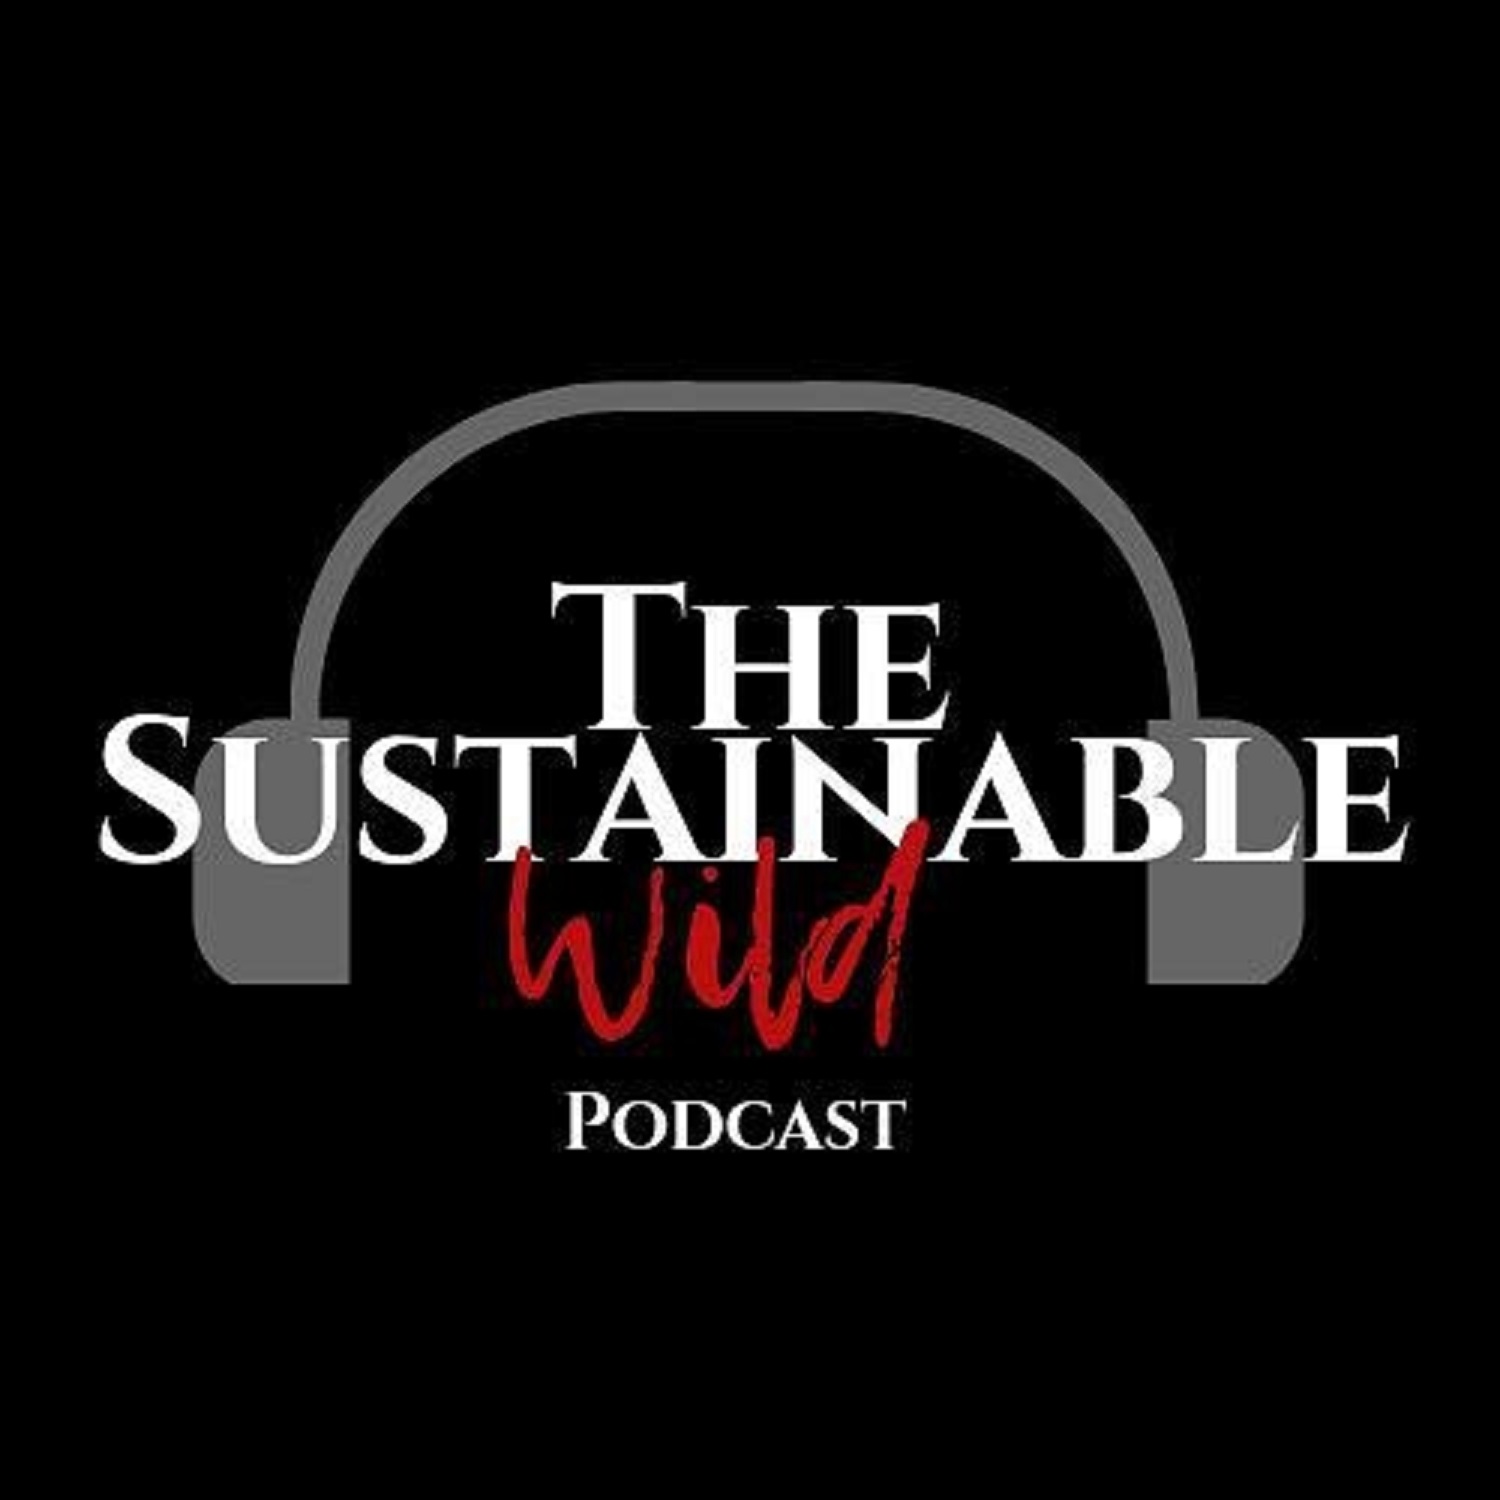 The Sustainable Wild Podcast |  Being Prepared for Wilderness Survival